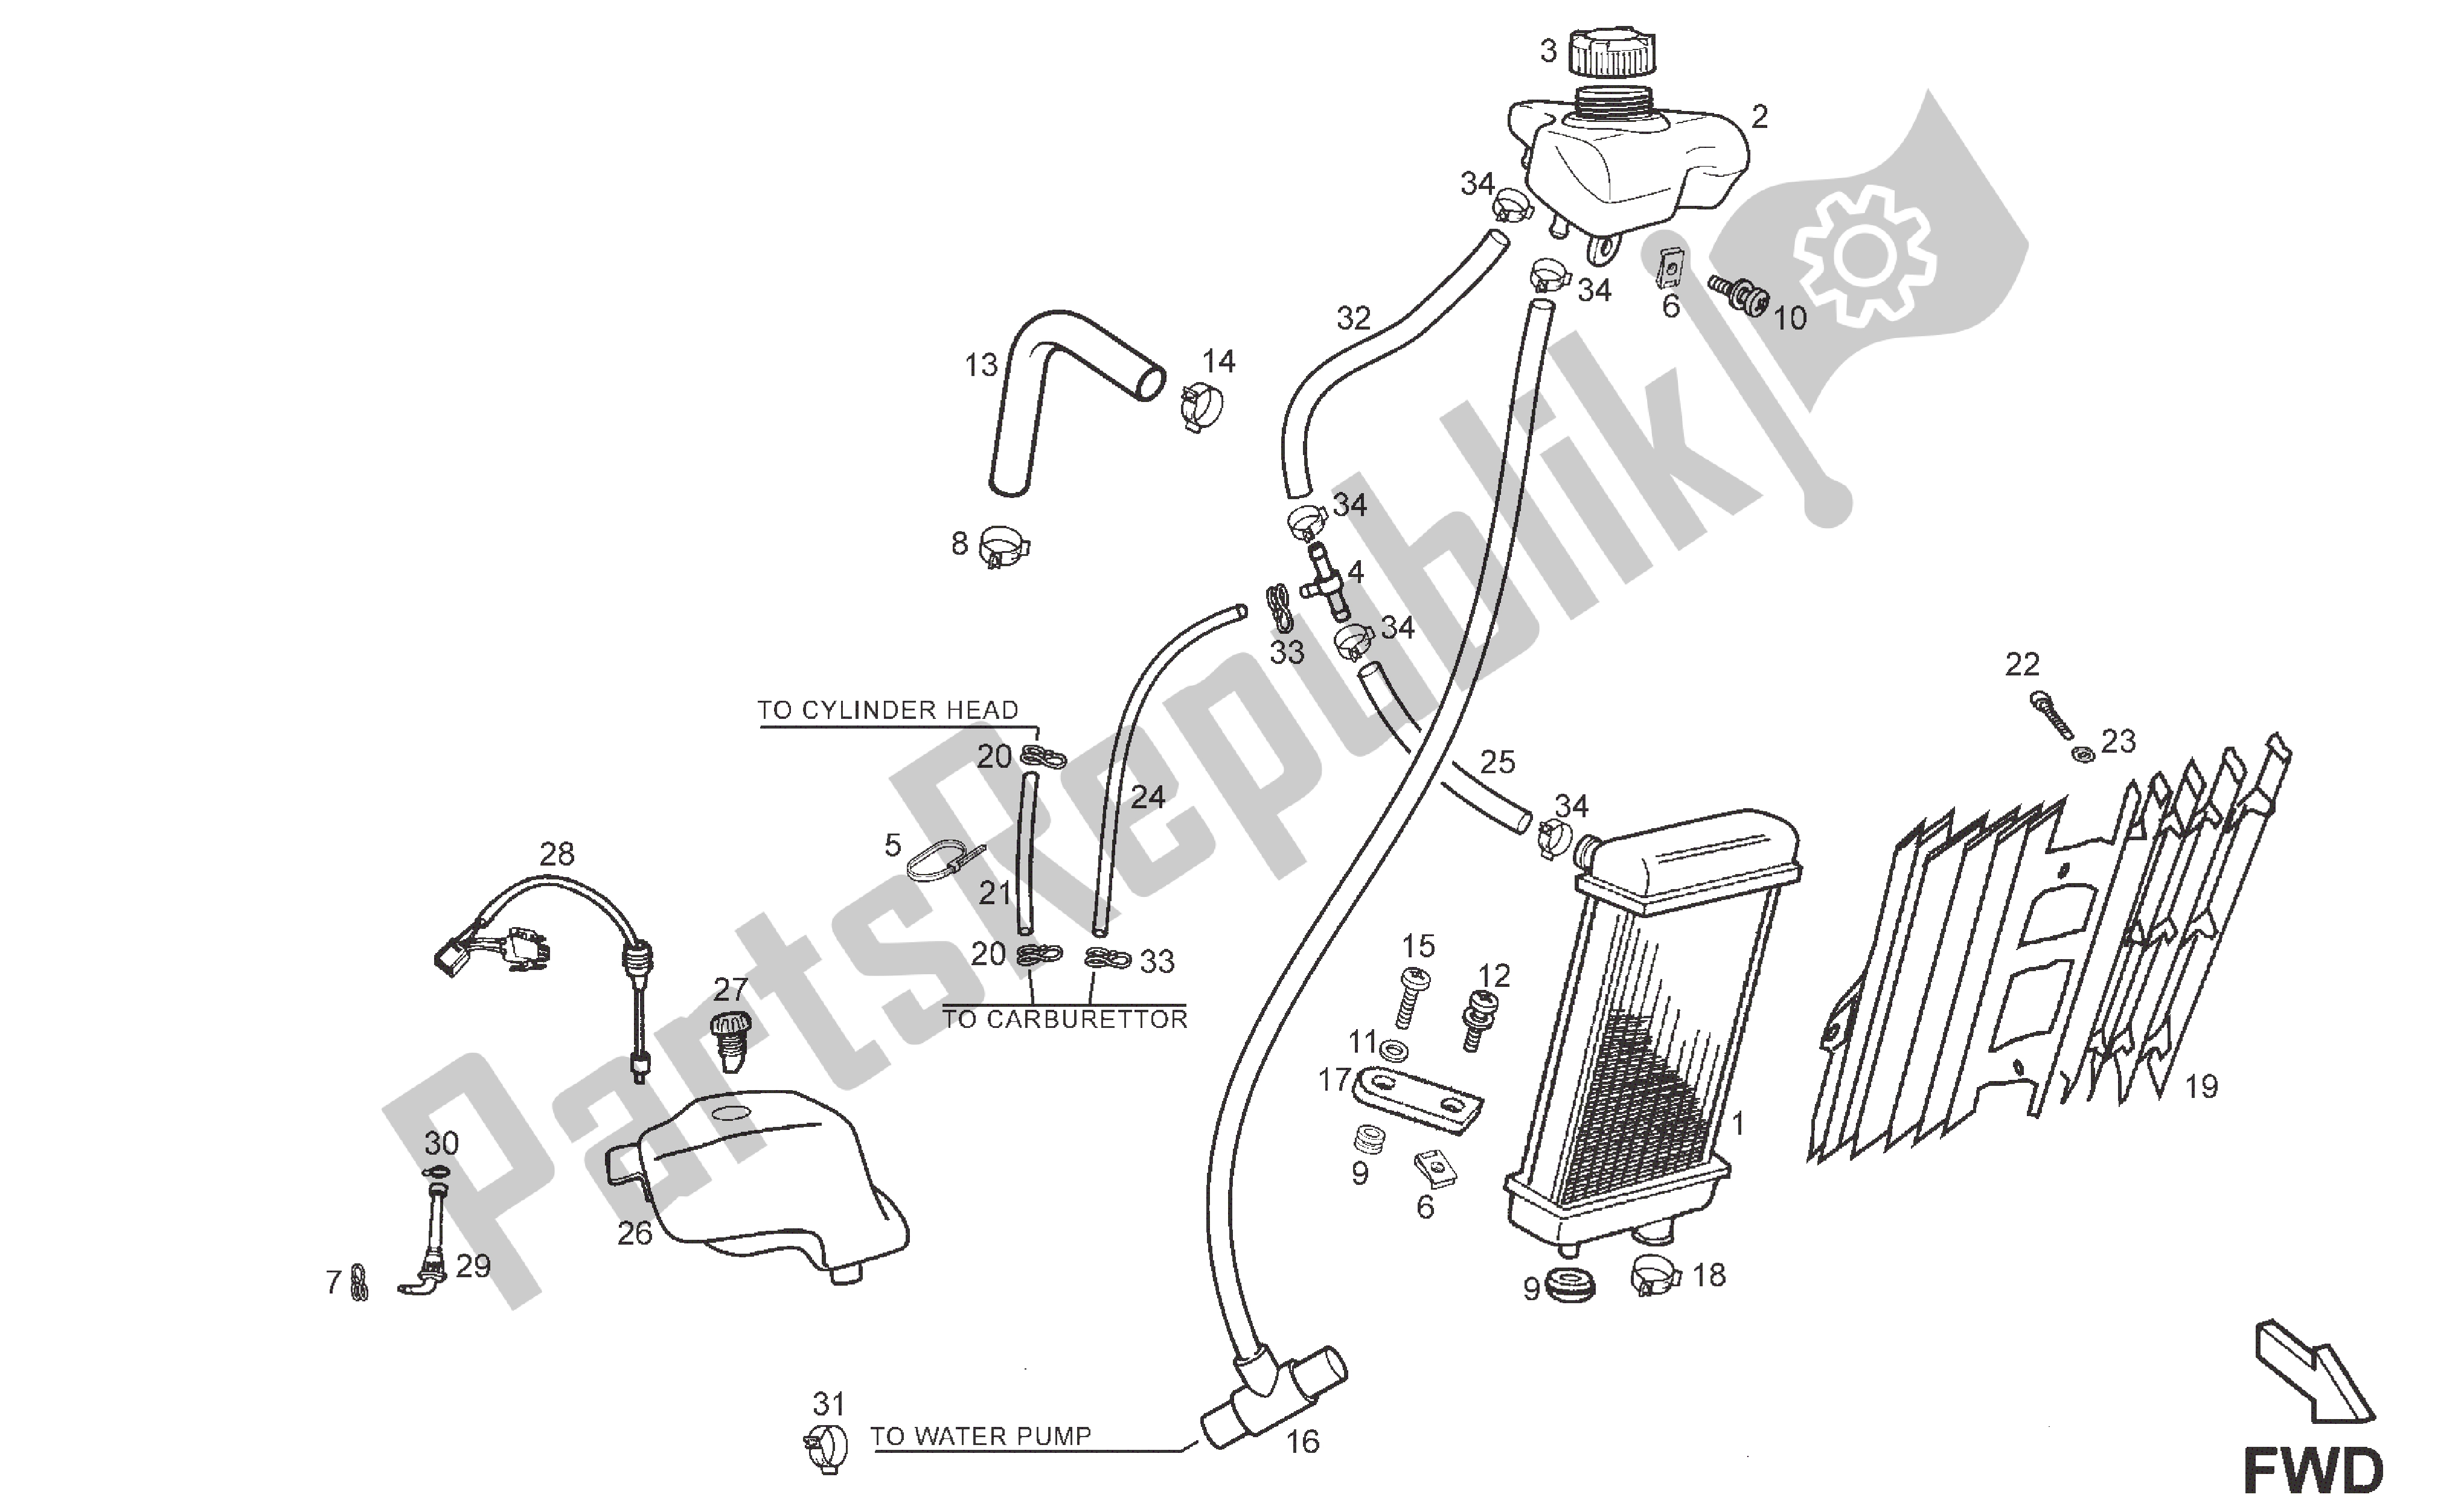 All parts for the Refrigeration System of the Derbi Senda R 50 2008